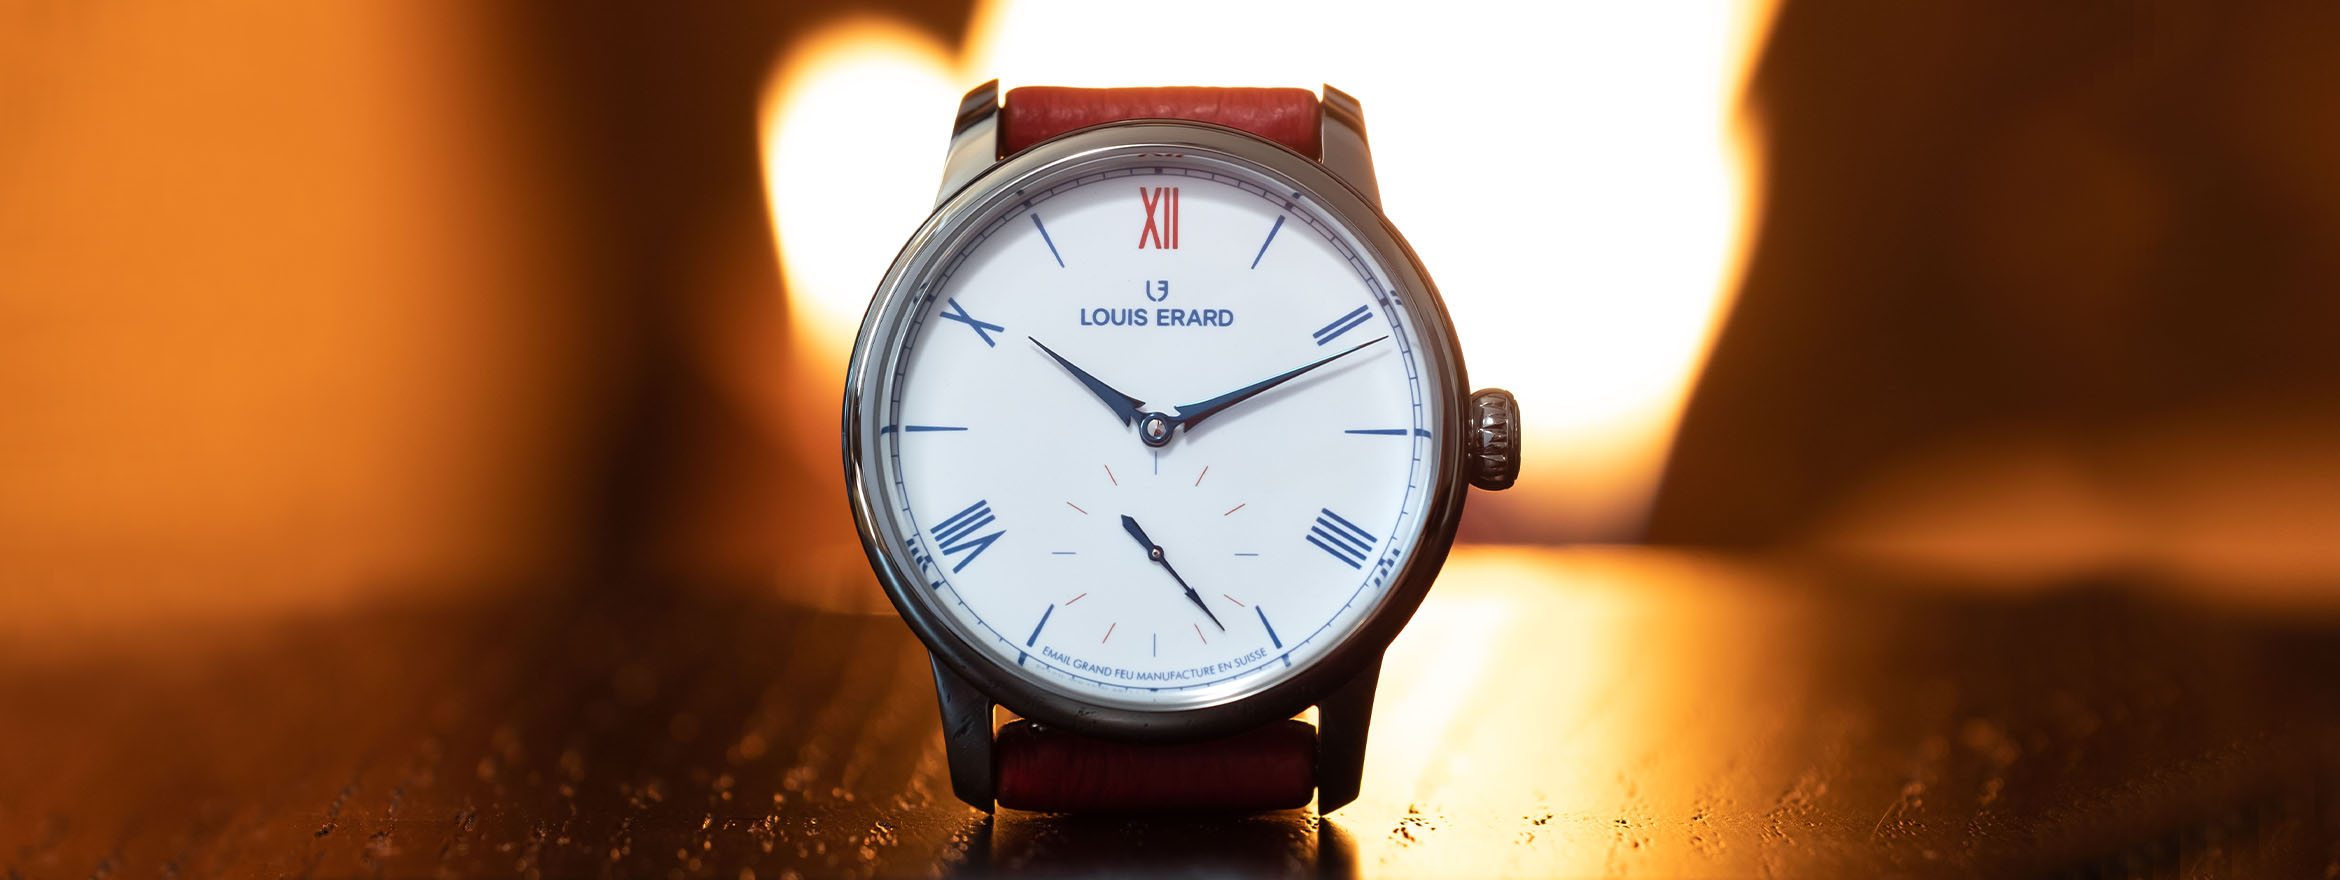 Louis Erard - On wrist look at the Louis Erard Excellence